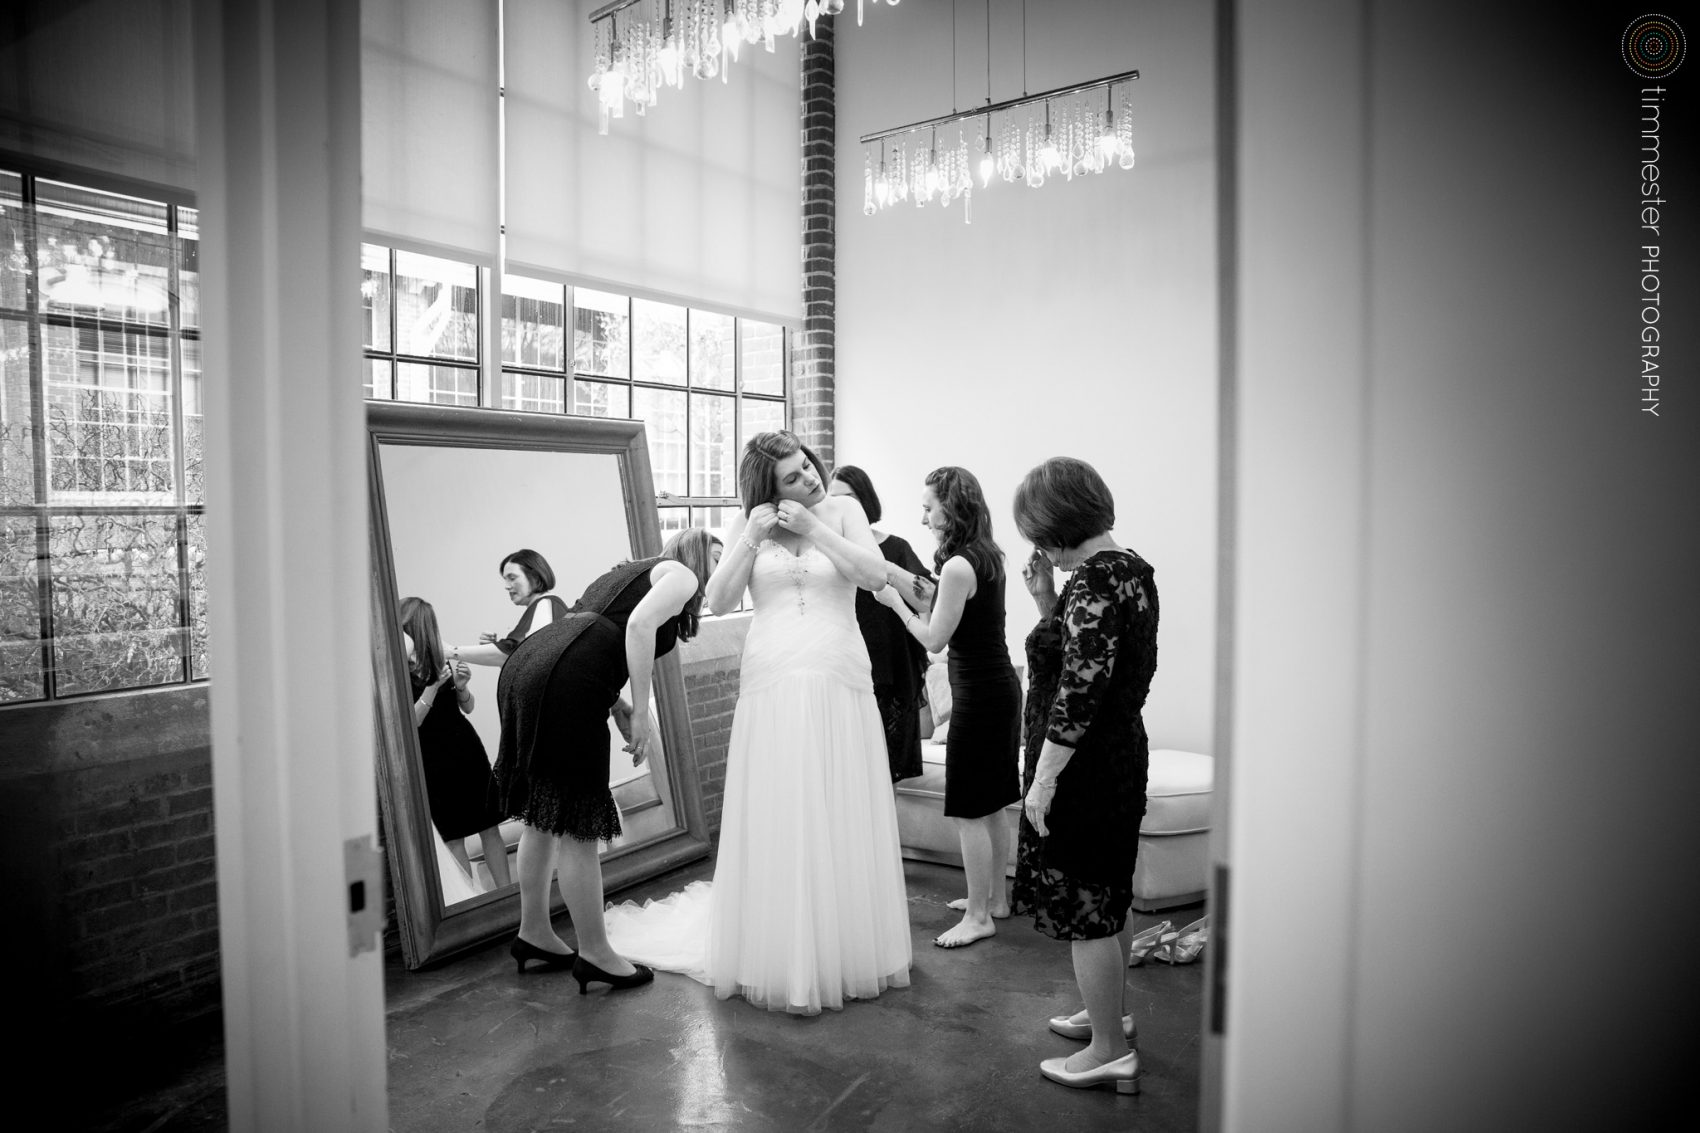 Jessica gets ready for her winter wedding to David at Durham's own The Cotton Room in North Carolina.